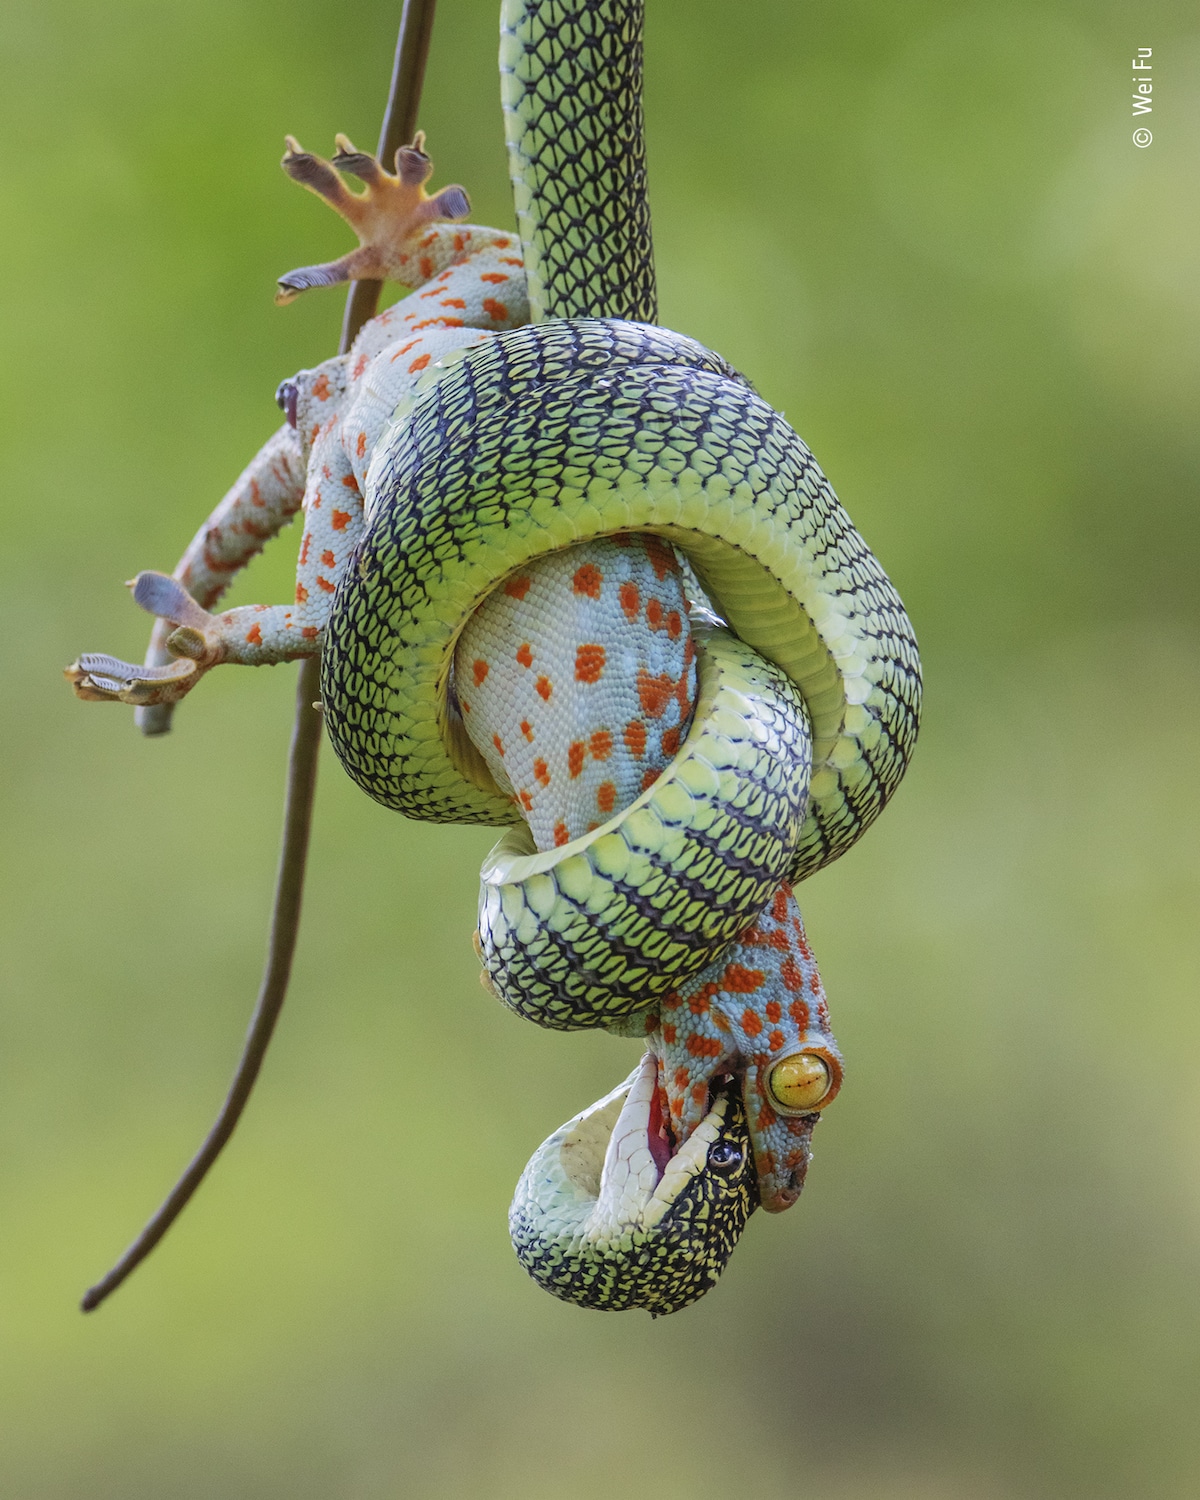 Golden Tree Snake Coiled Around a Gecko